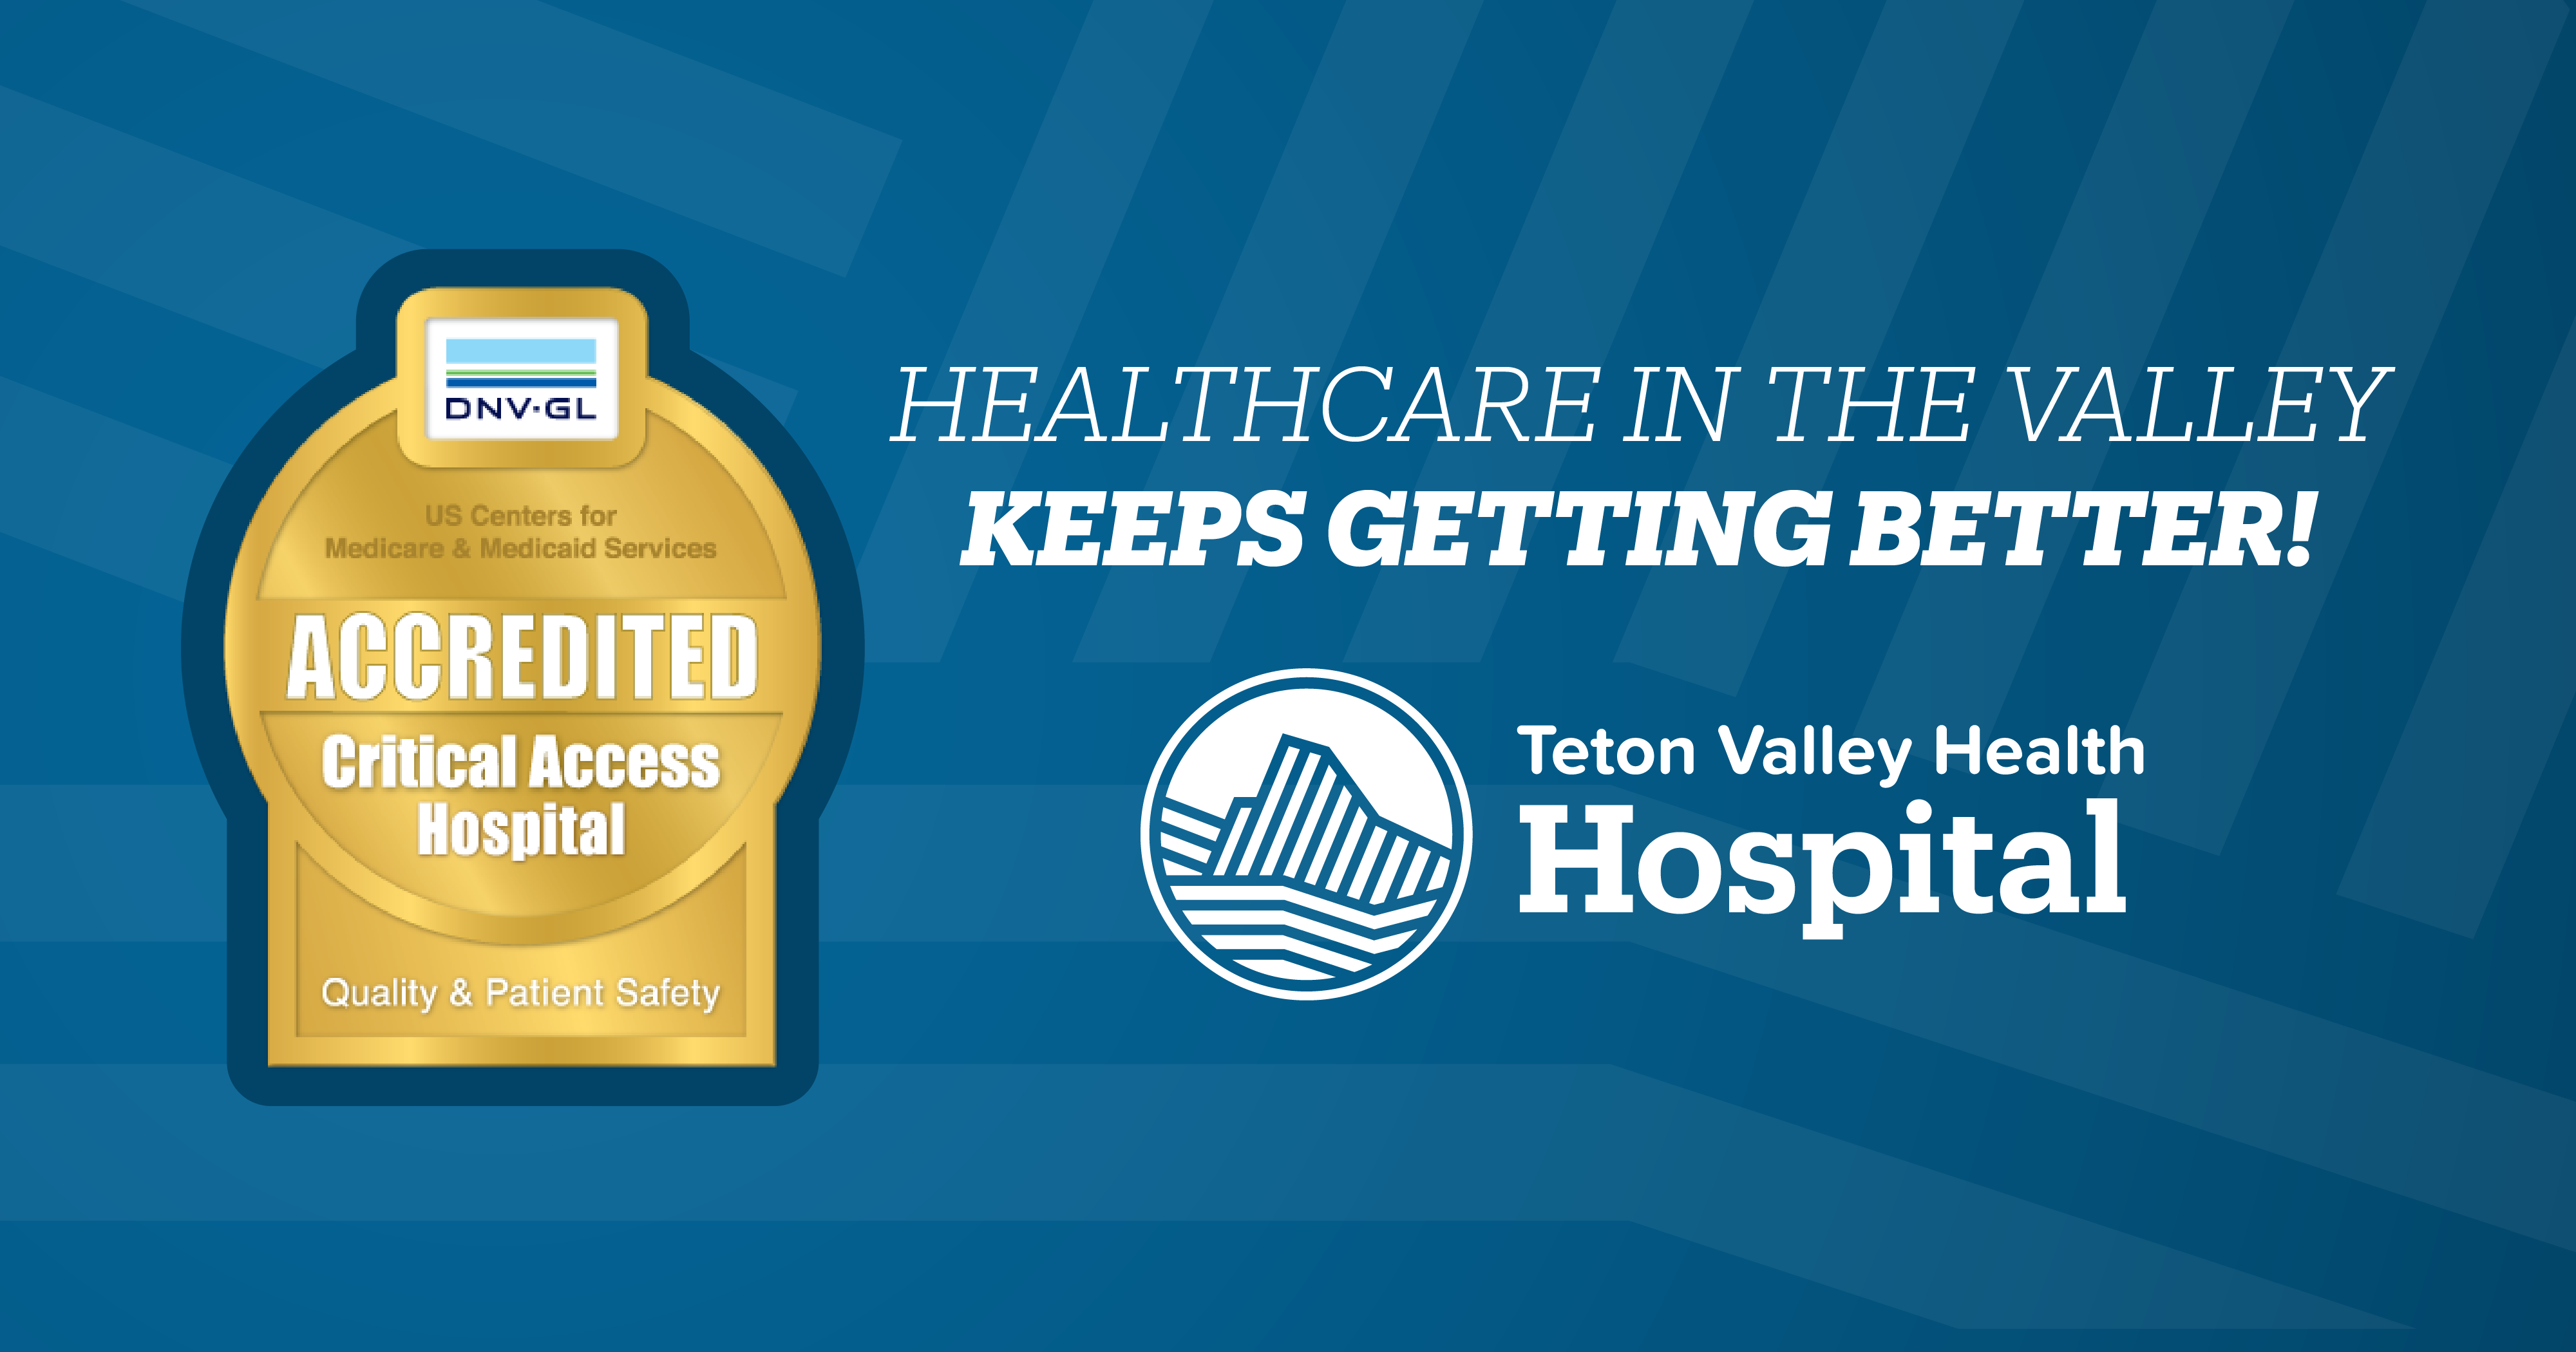 Teton Valley Hospital Achieves DNV Accreditation for Exceptional Quality and Patient Safety